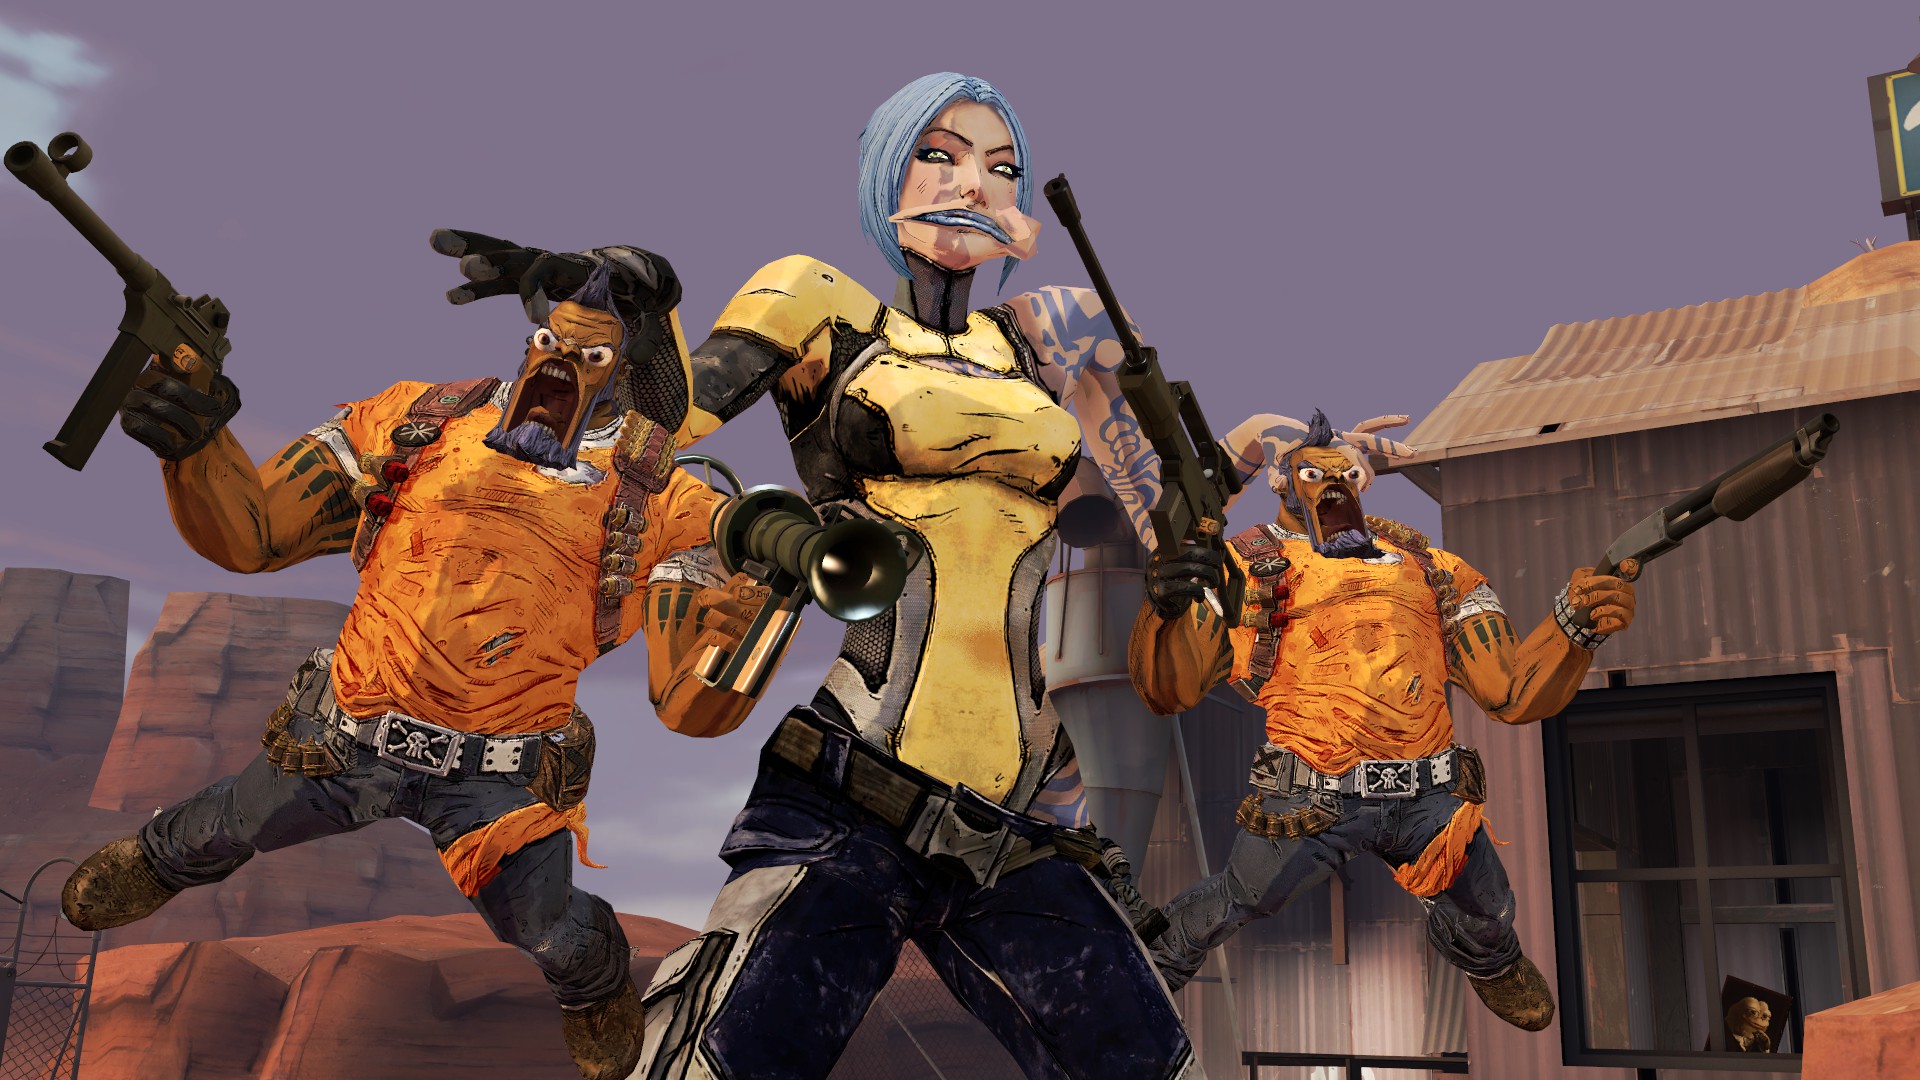 Gmod Borderlands 2 Coop With 2 Salvadors By Happy Heavy On Deviantart